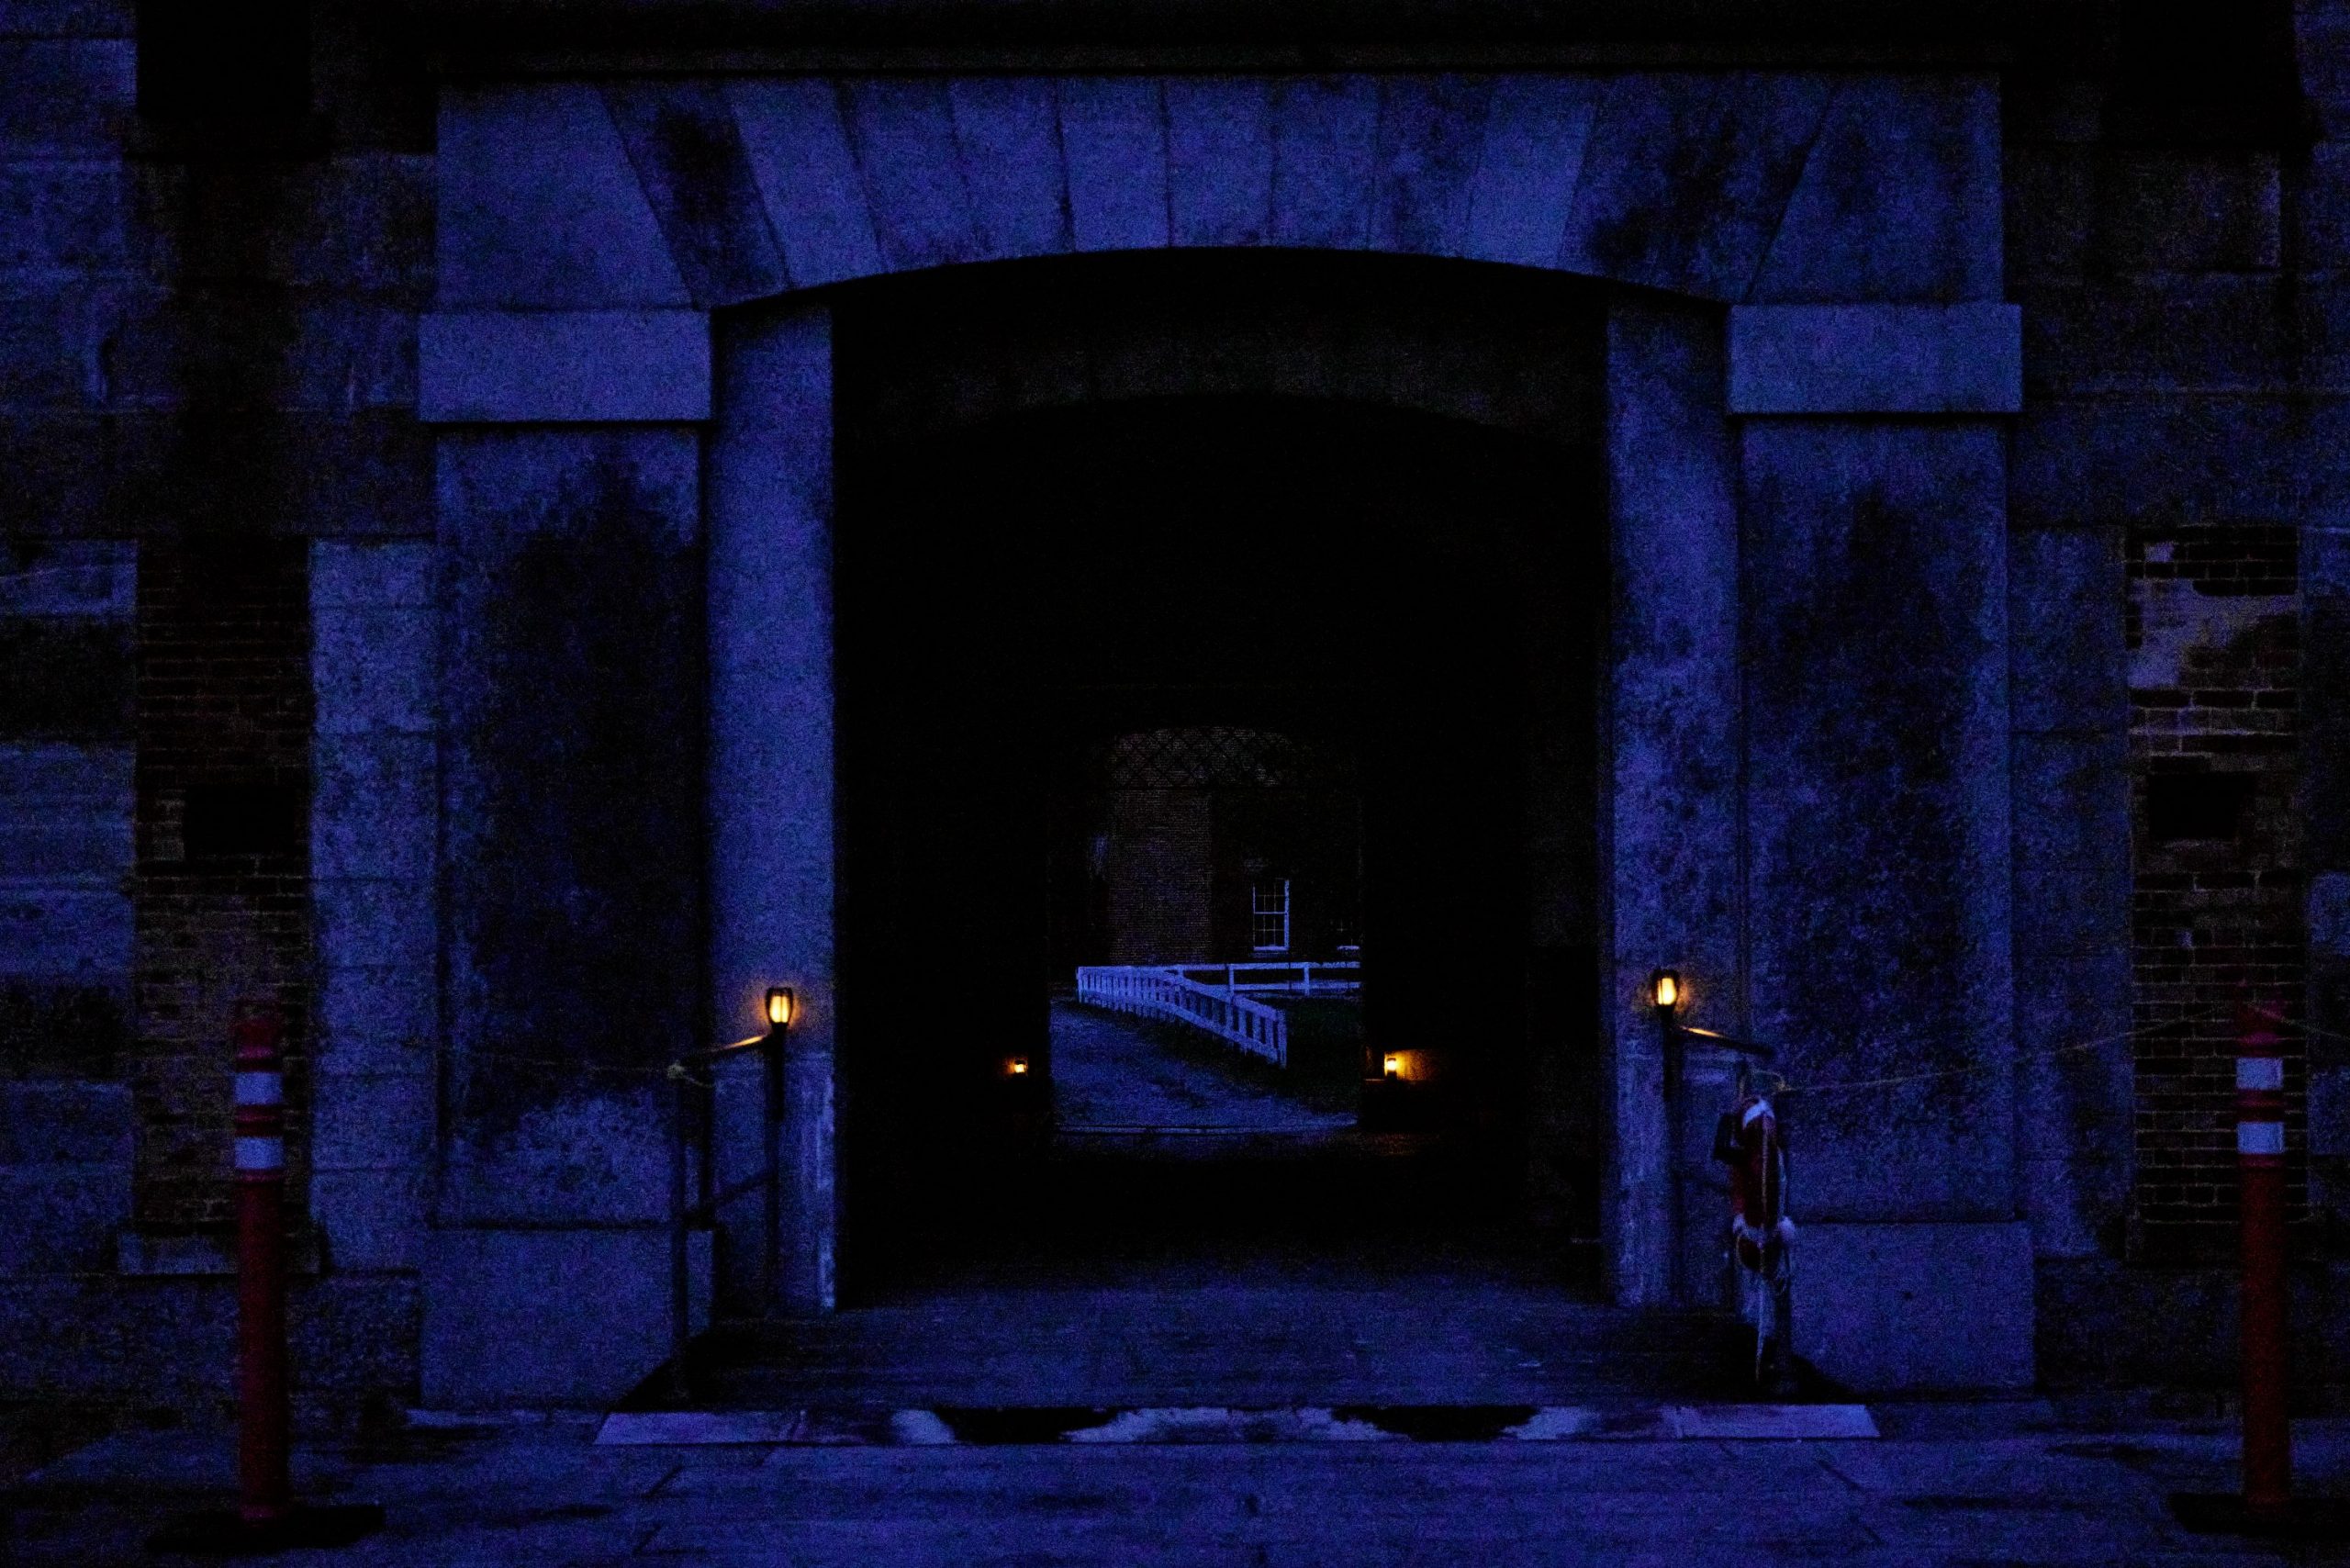 A night scene showing the entry gate of a masonry fort lit by old-fashioned lanterns.